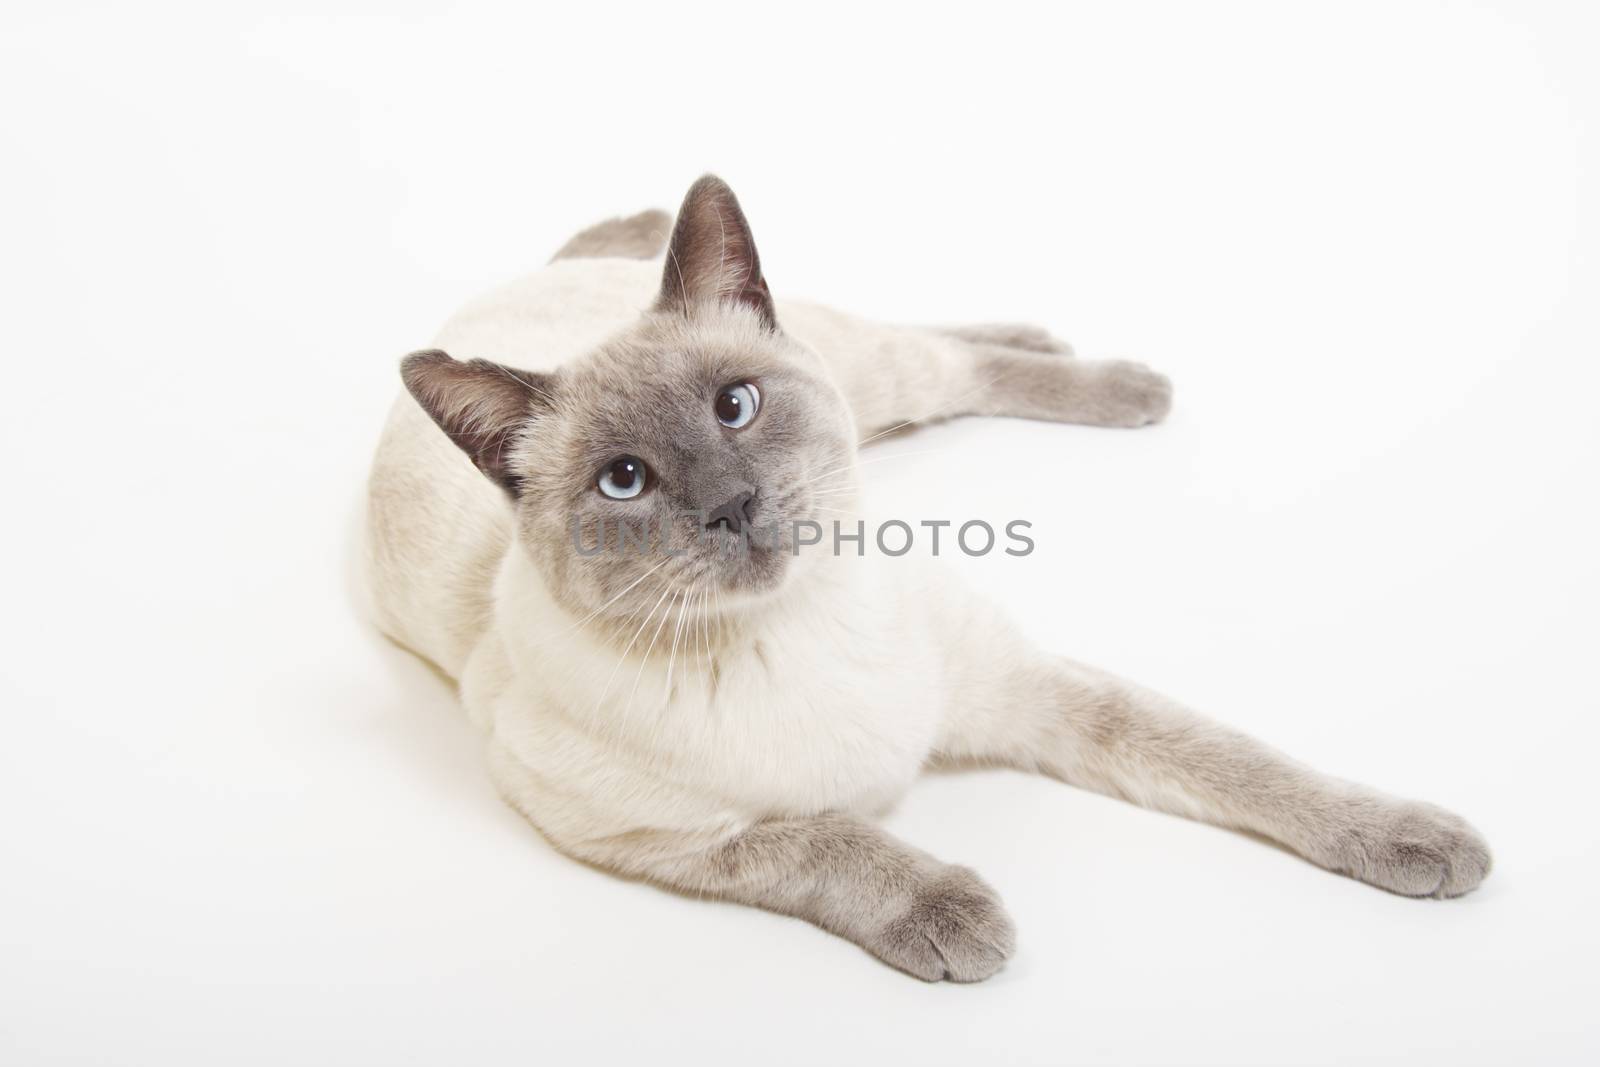 Male Lilac Point Siamese laying on a white background.